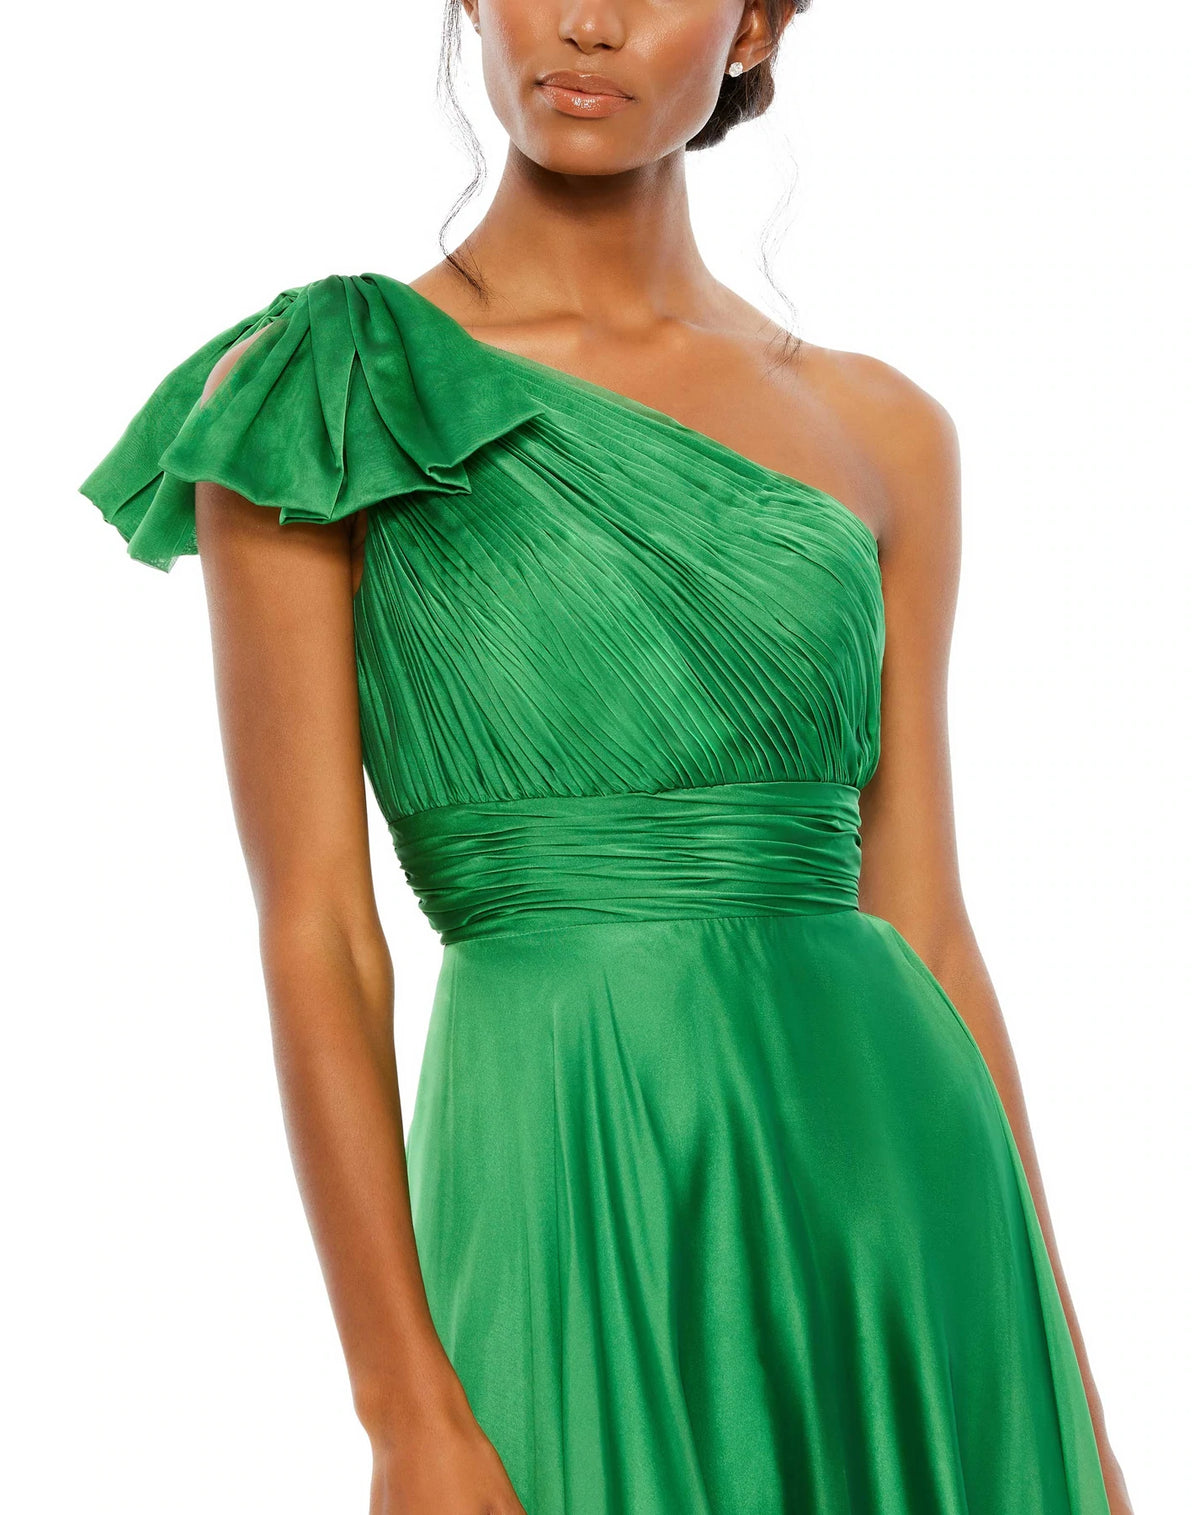 This elegant Mac Duggal one-sleeved emerald green, dress is a stunning formal gown for special occasions. With beautiful draped asymmetric detail across one shoulder and an empire bust together with a flower skirt, this elegant gown will truly have you feeling like the belle of the ball close up